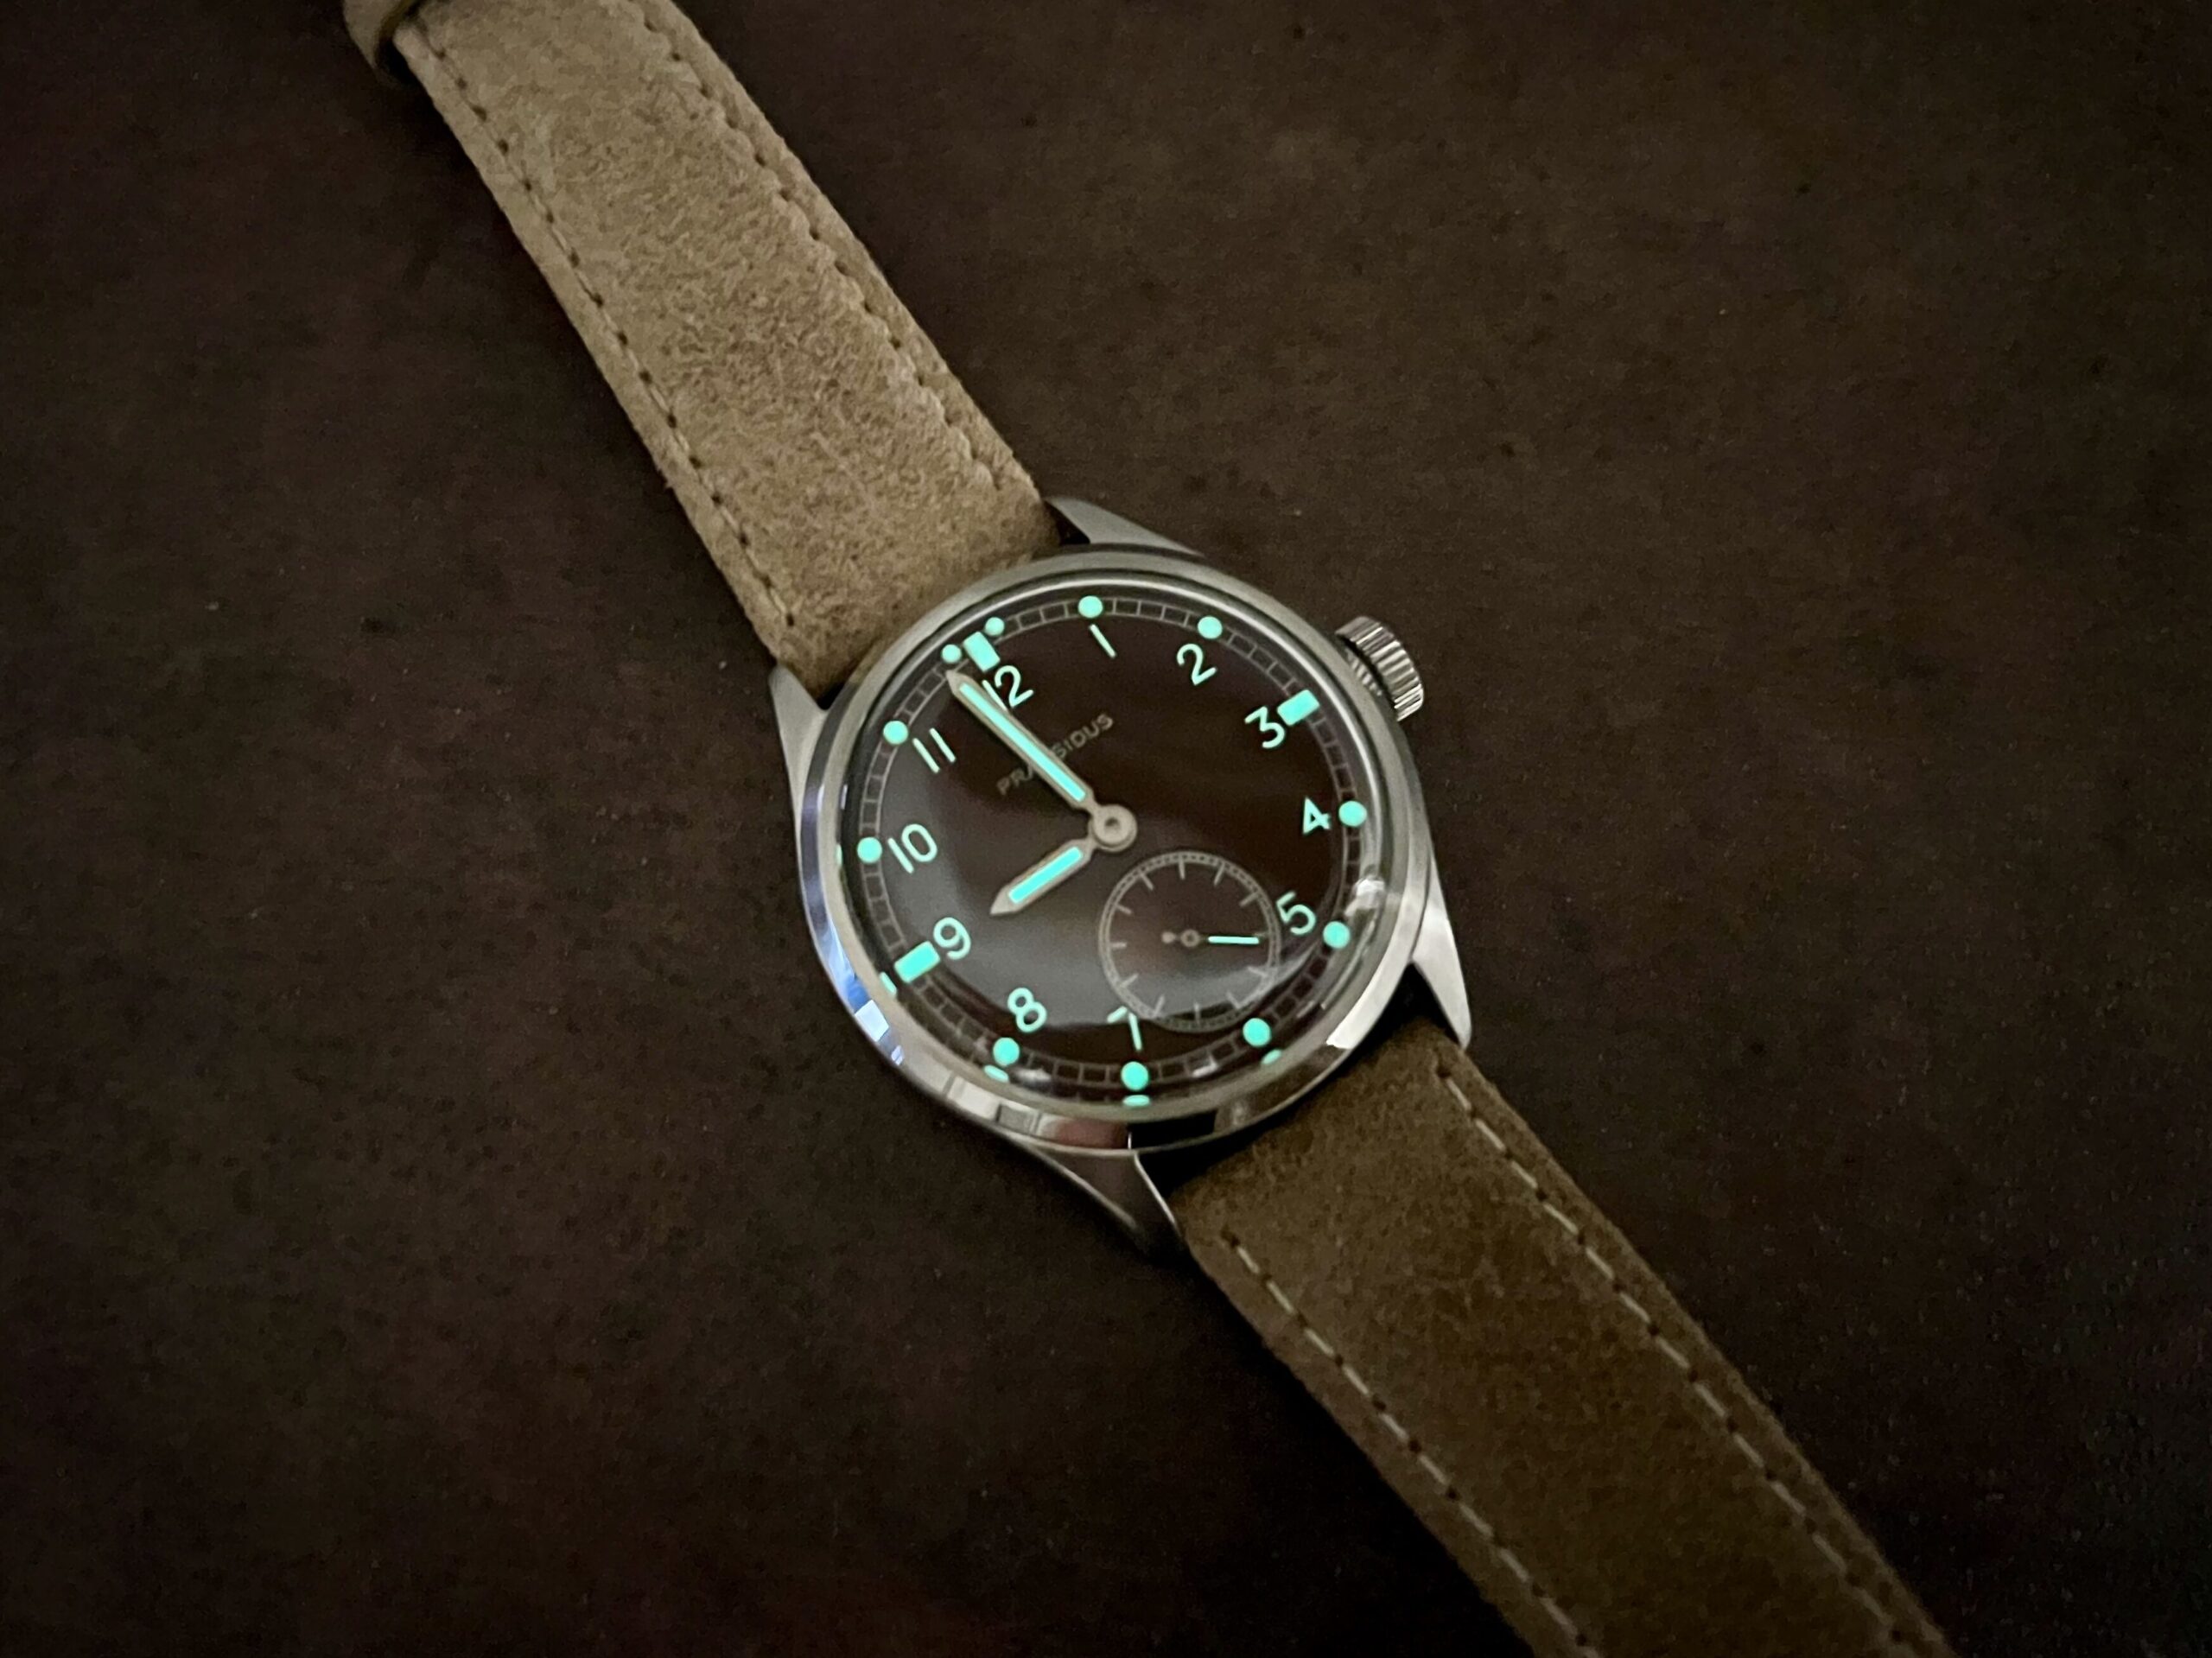 <em>Even with the aging process, the lume on the Tropical dial is quite legible in the dark after being out in the sun or receiving a blast from a flashlight (WATM/Miguel Ortiz)</em>